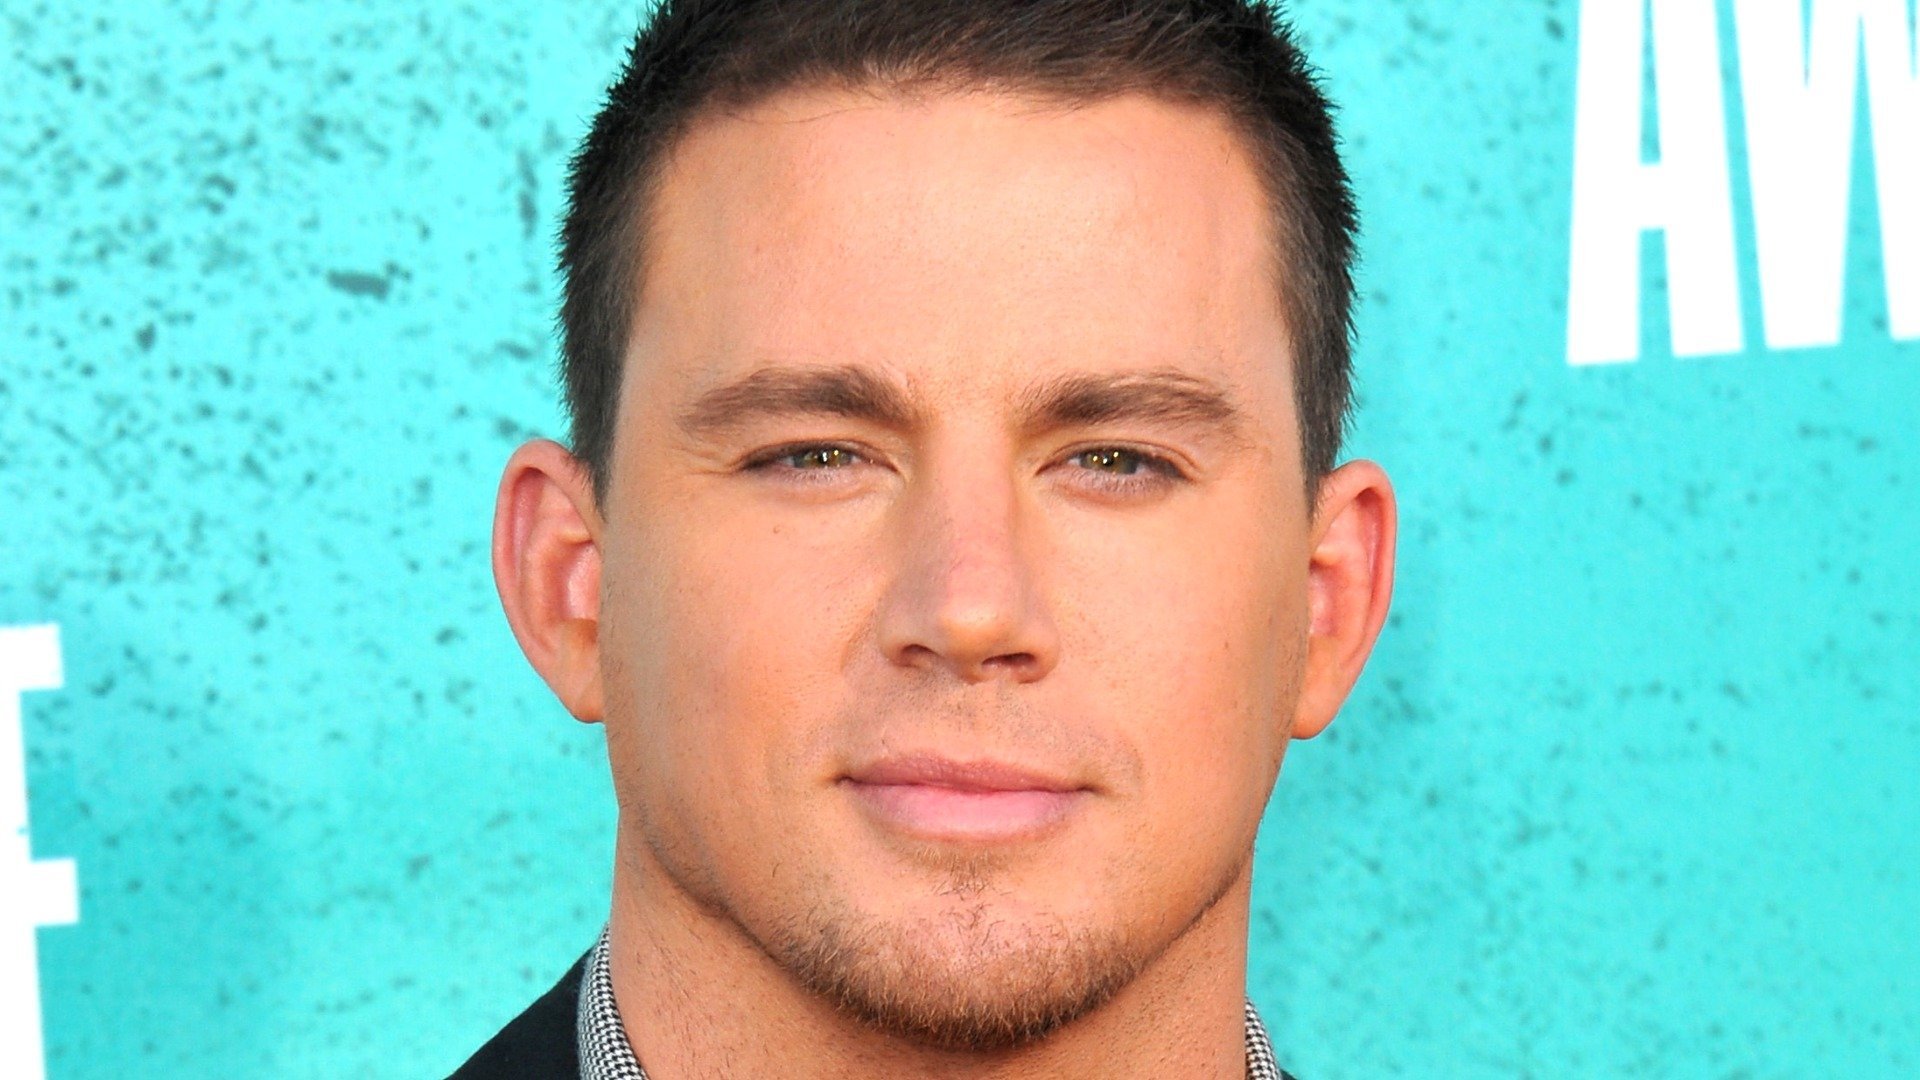 Channing Tatum Pretty Much Disappeared, And It's Obvious Why